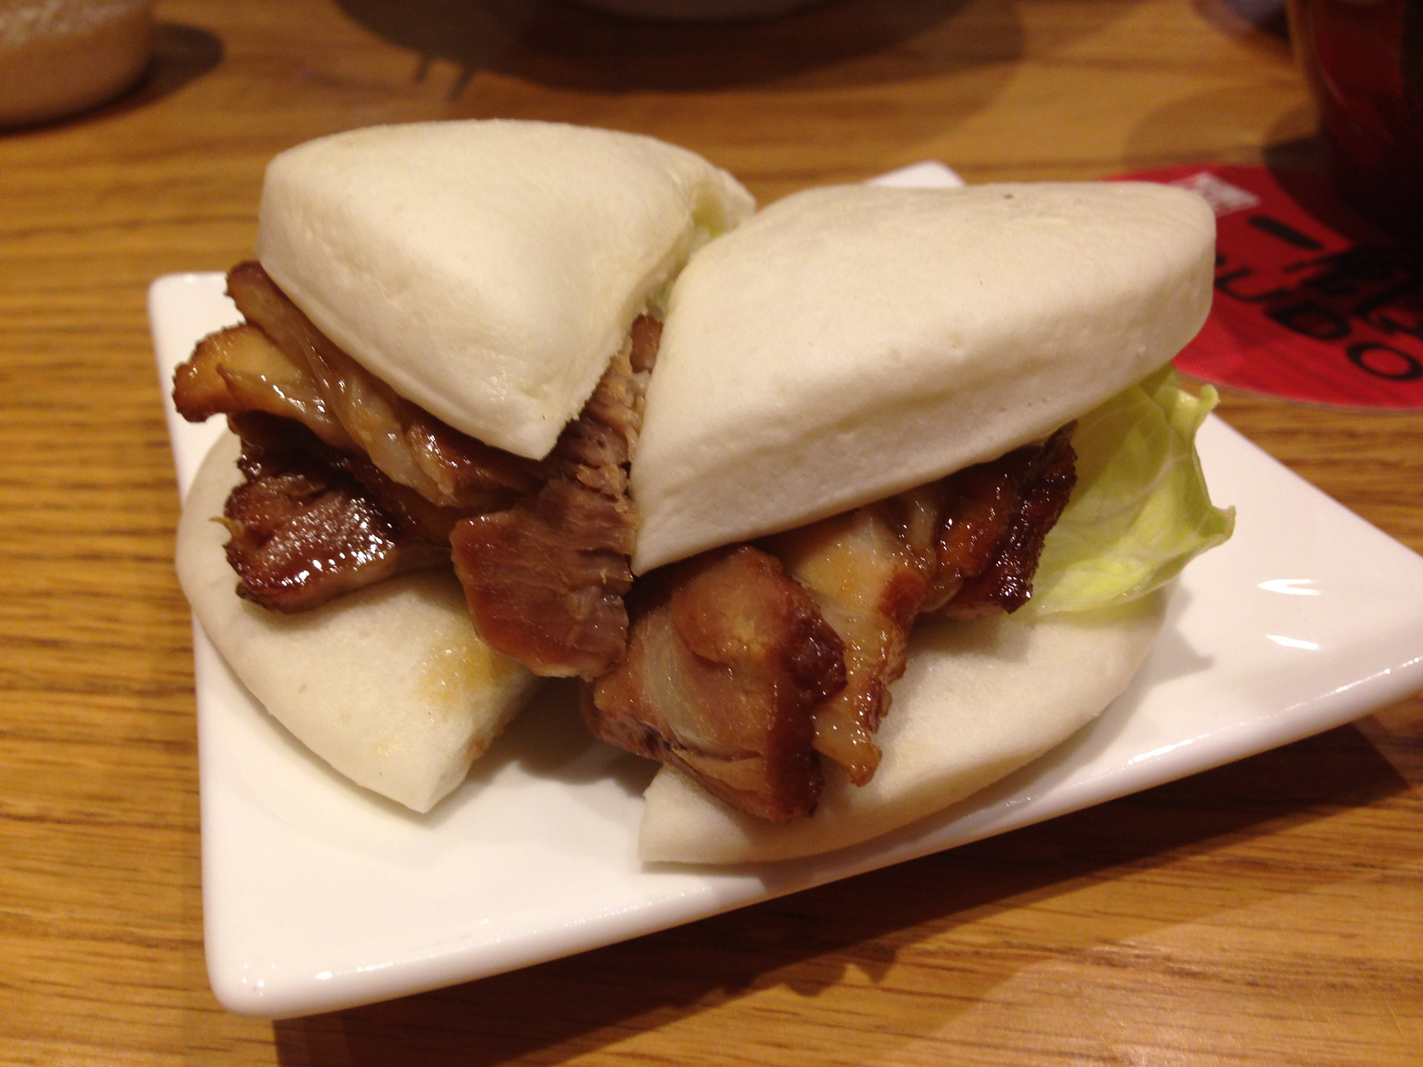 We ordered a popular appetizer from the NY location: Roasted Pork Buns! They were a great way to start the meal!